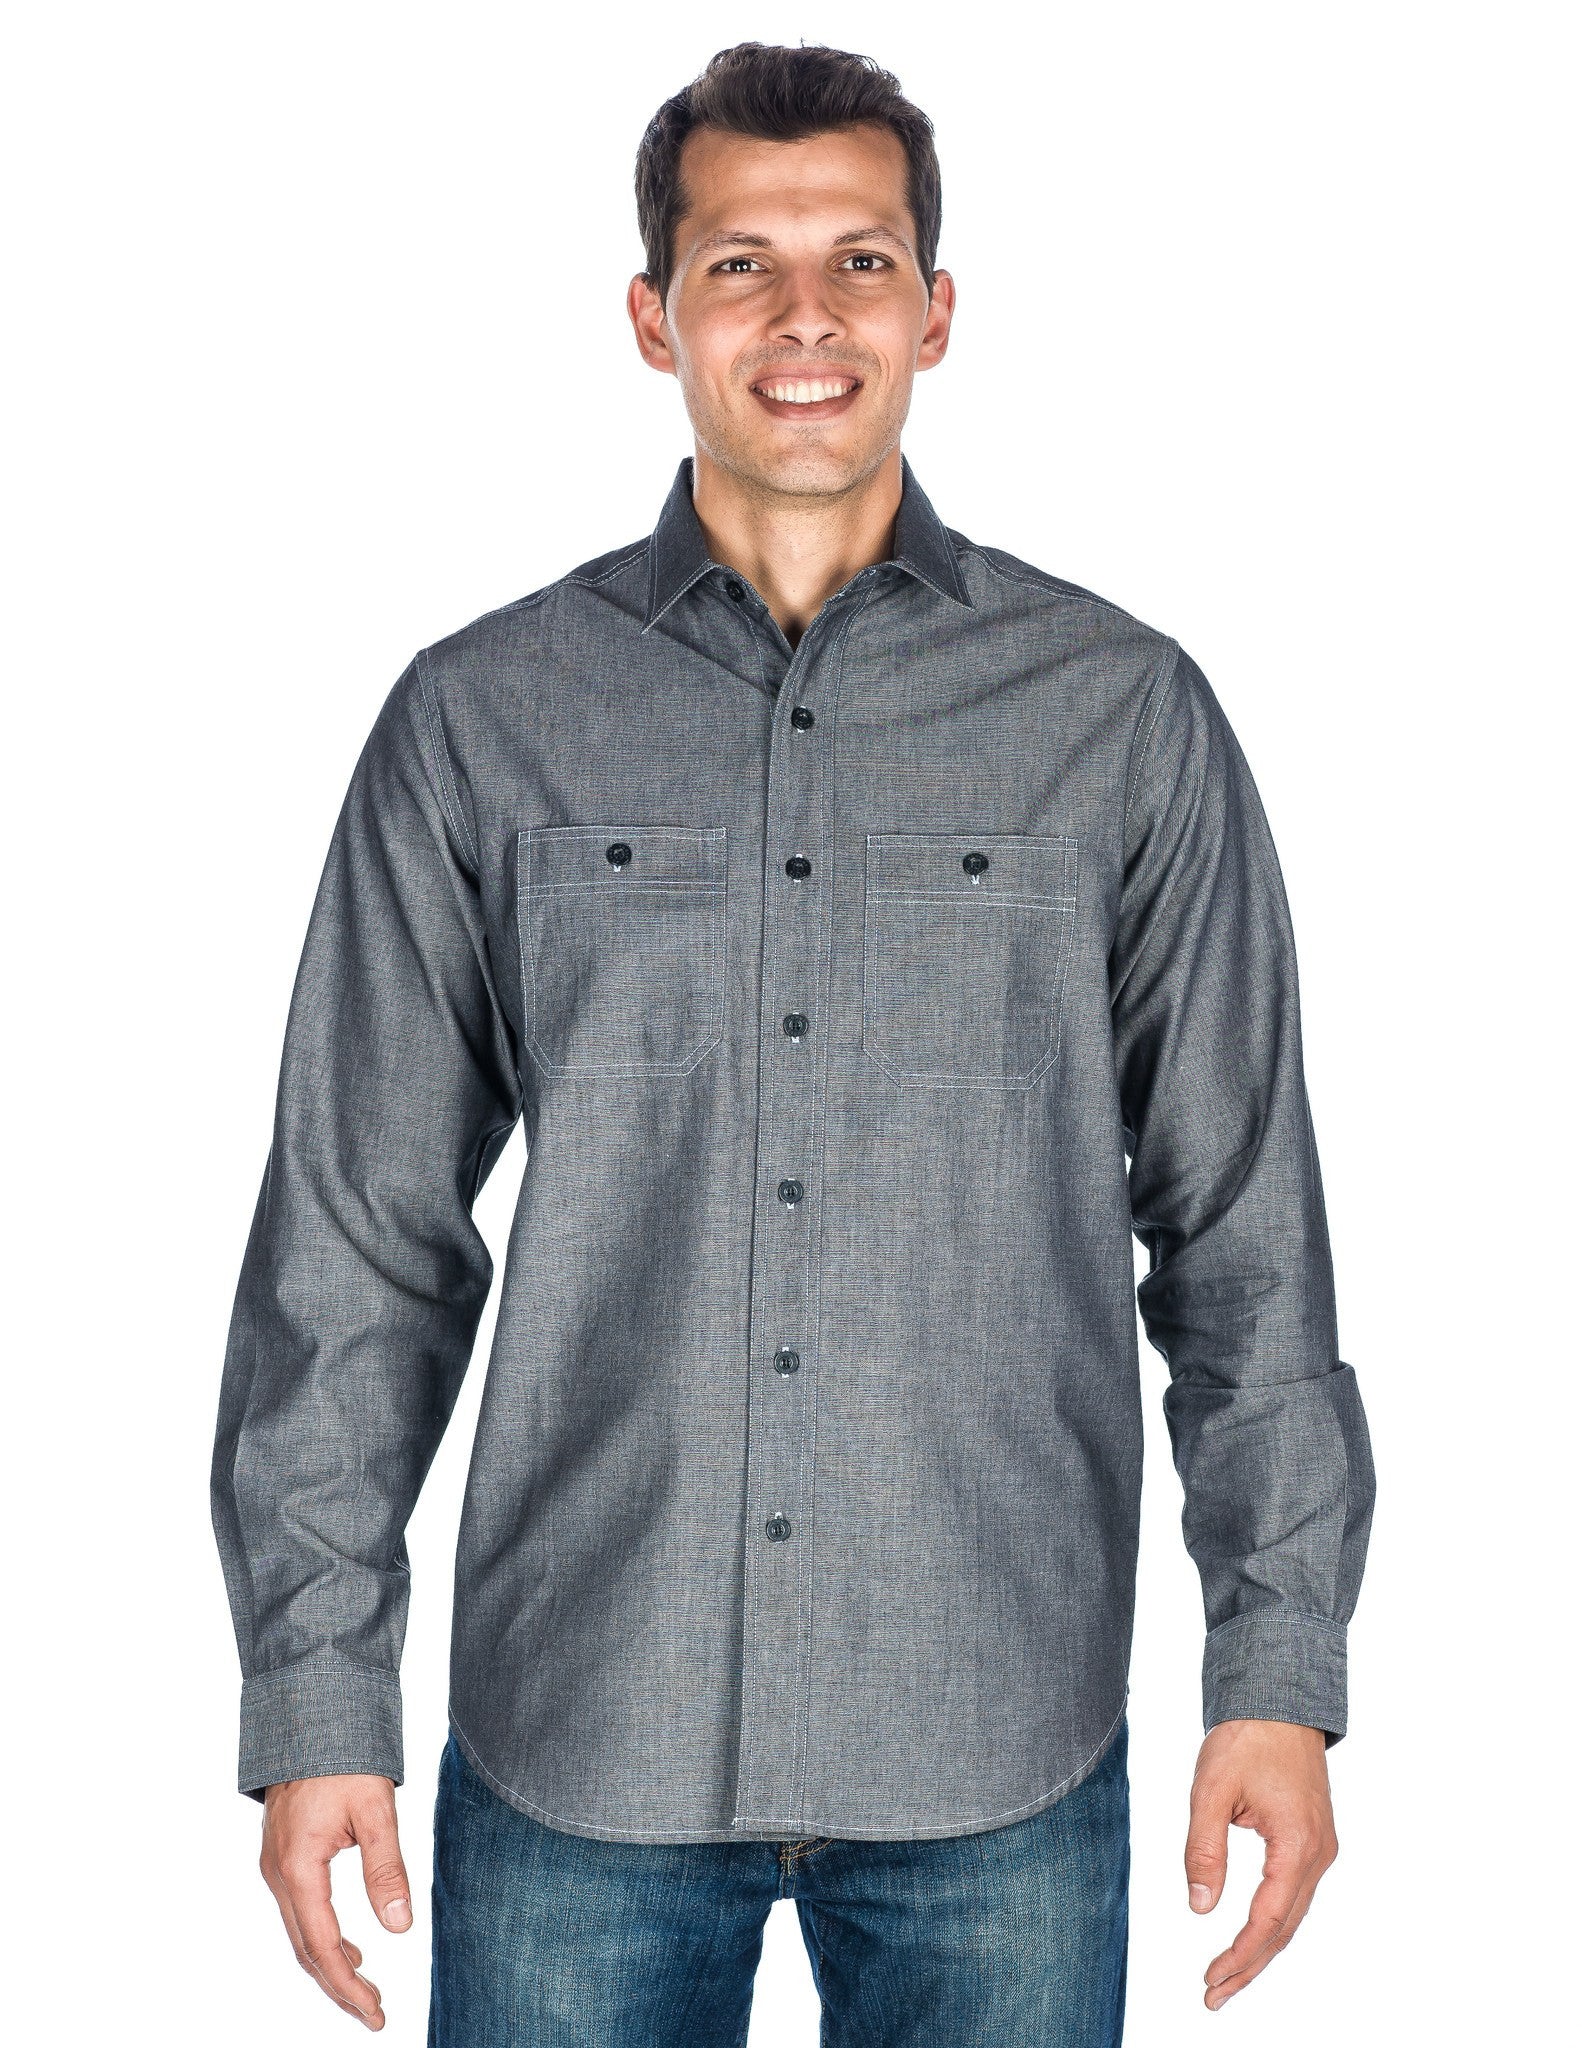 Men's Comfort-Fit Cotton Chambray Casual Shirt